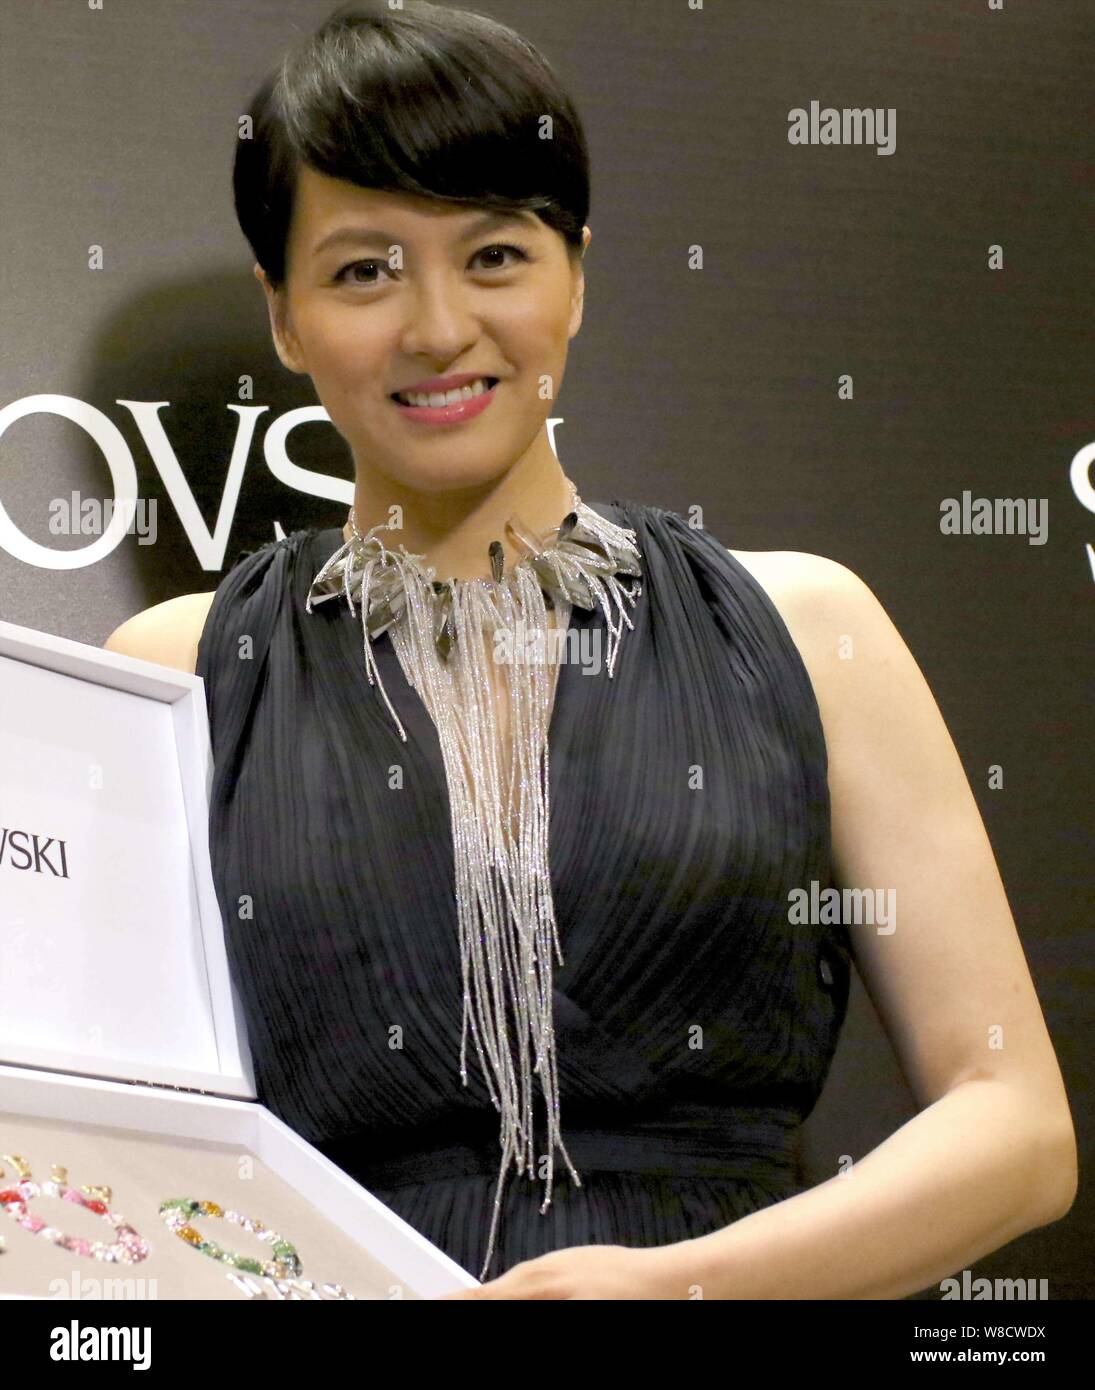 Hong Kong singer Gigi Leung poses during a promotional event for Swarovski in Shanghai, China, 11 June 2015. Stock Photo